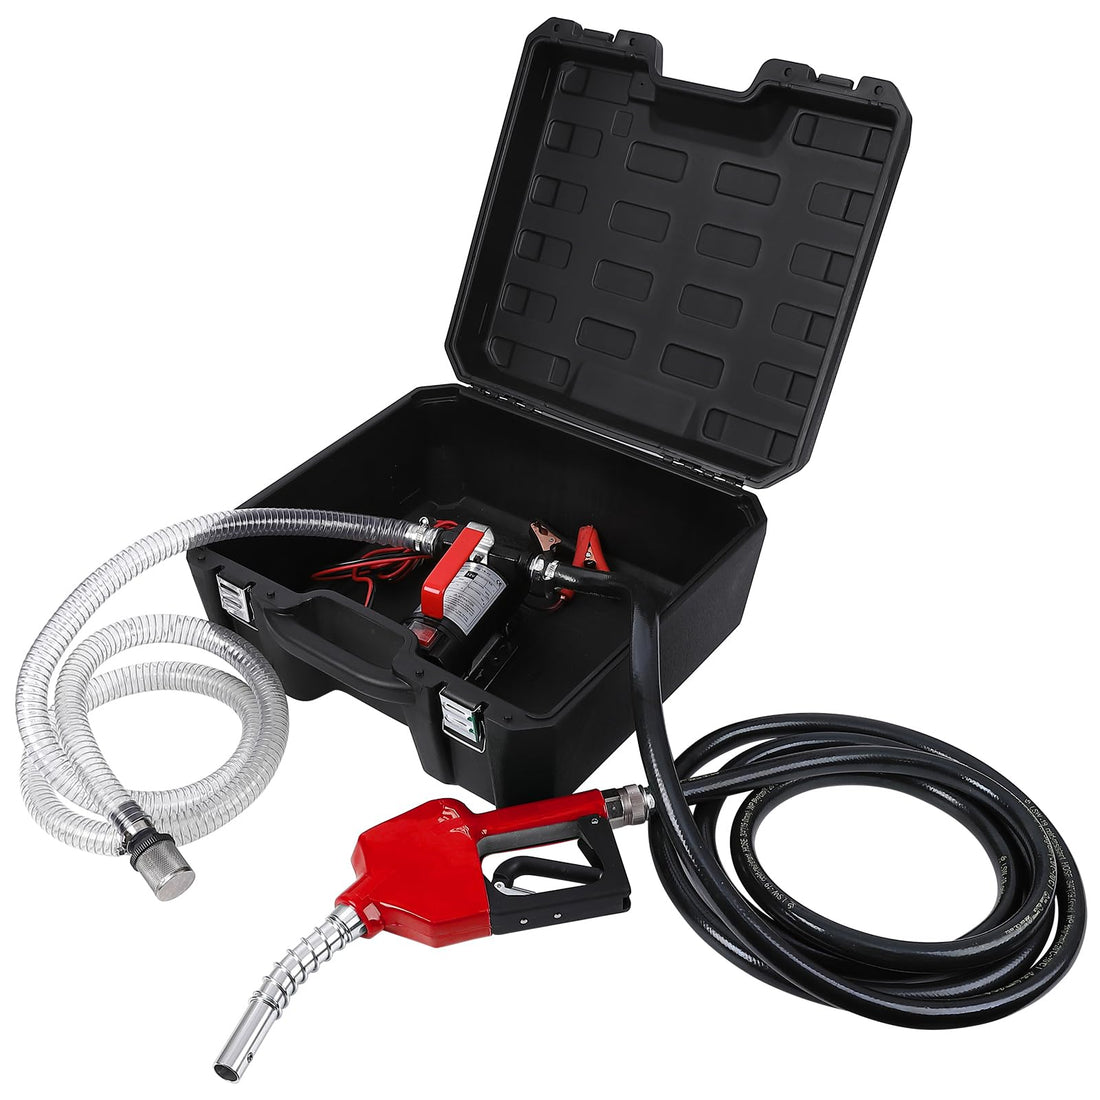 Garvee 12 Volt Fuel Transfer Pump Kit, 10GPM/40LPM Portable Electric Self-Priming Fuel Transfer Extractor Pump Kit with Portable Case, Aluminum Automatic Nozzle, 360 Swivel Connector, Red